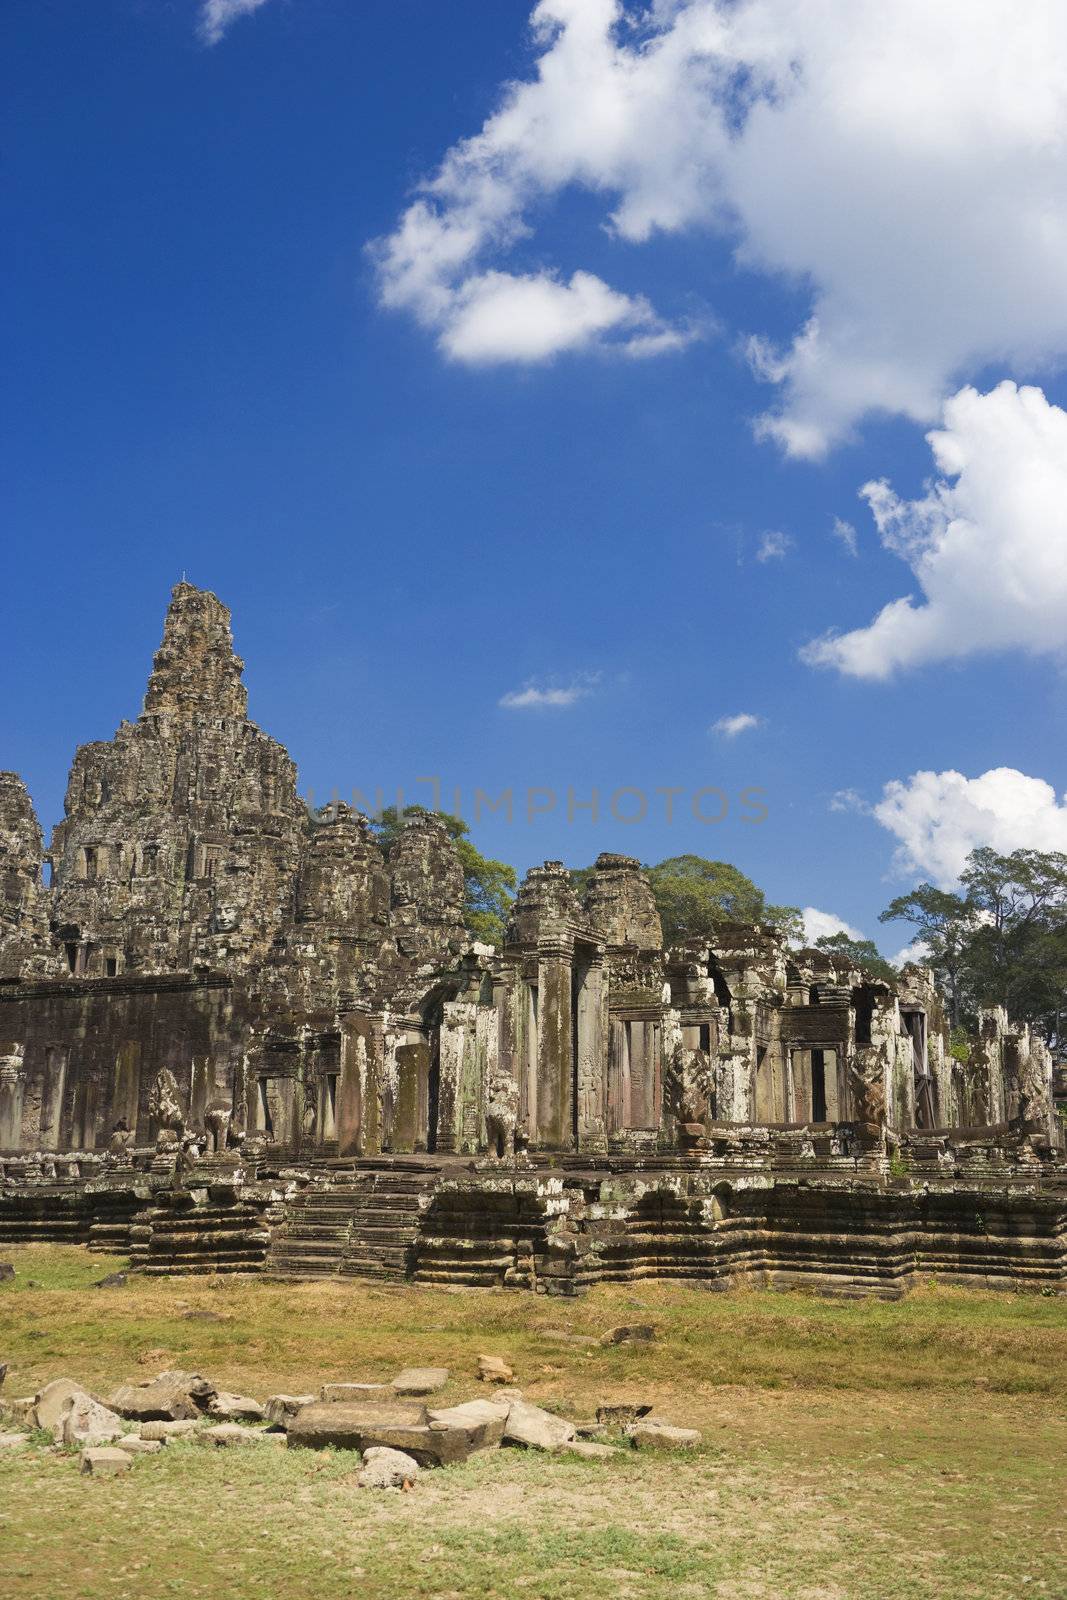 Image of UNESCO's World Heritage Site of Bayon, which is part of the larger temple complex of Angkor Thom, located at Siem Reap, Cambodia. This is one of the temples in Siem Reap where the Hollywood movie Lara Croft Tomb Raider was filmed at.